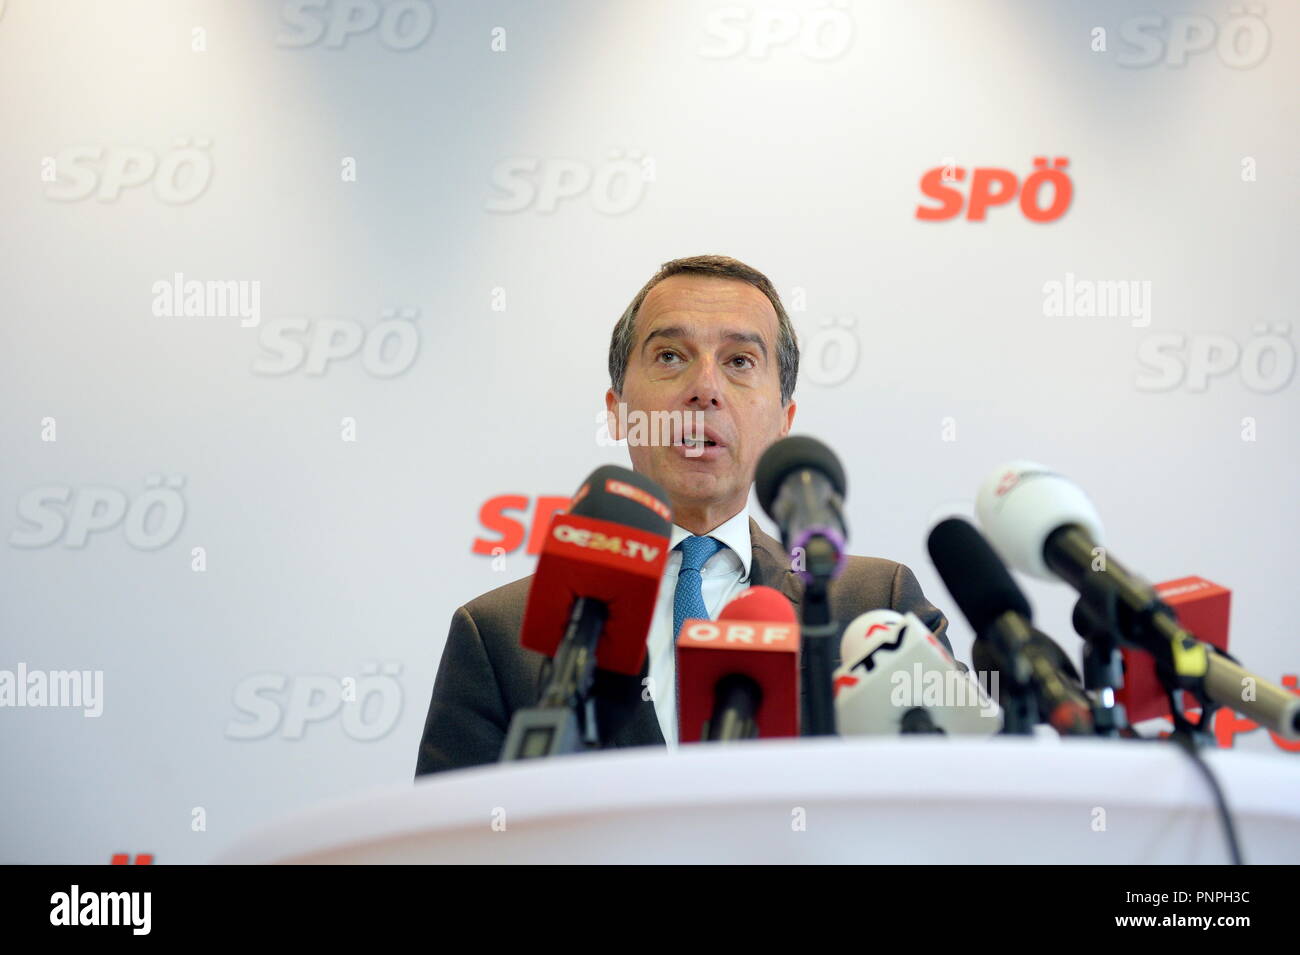 Vienna, Austria. September 22, 2018. Press statement by the party chairman of the SPÖ (Social Democratic Party of Austria), Christian Kern. Christian Kern has announced his resignation from the party presidency, possible successor is Pamela Rendi-Wagner. Picture shows former Chancellor Christian Kern.  Credit: Franz Perc / Alamy Live News Stock Photo